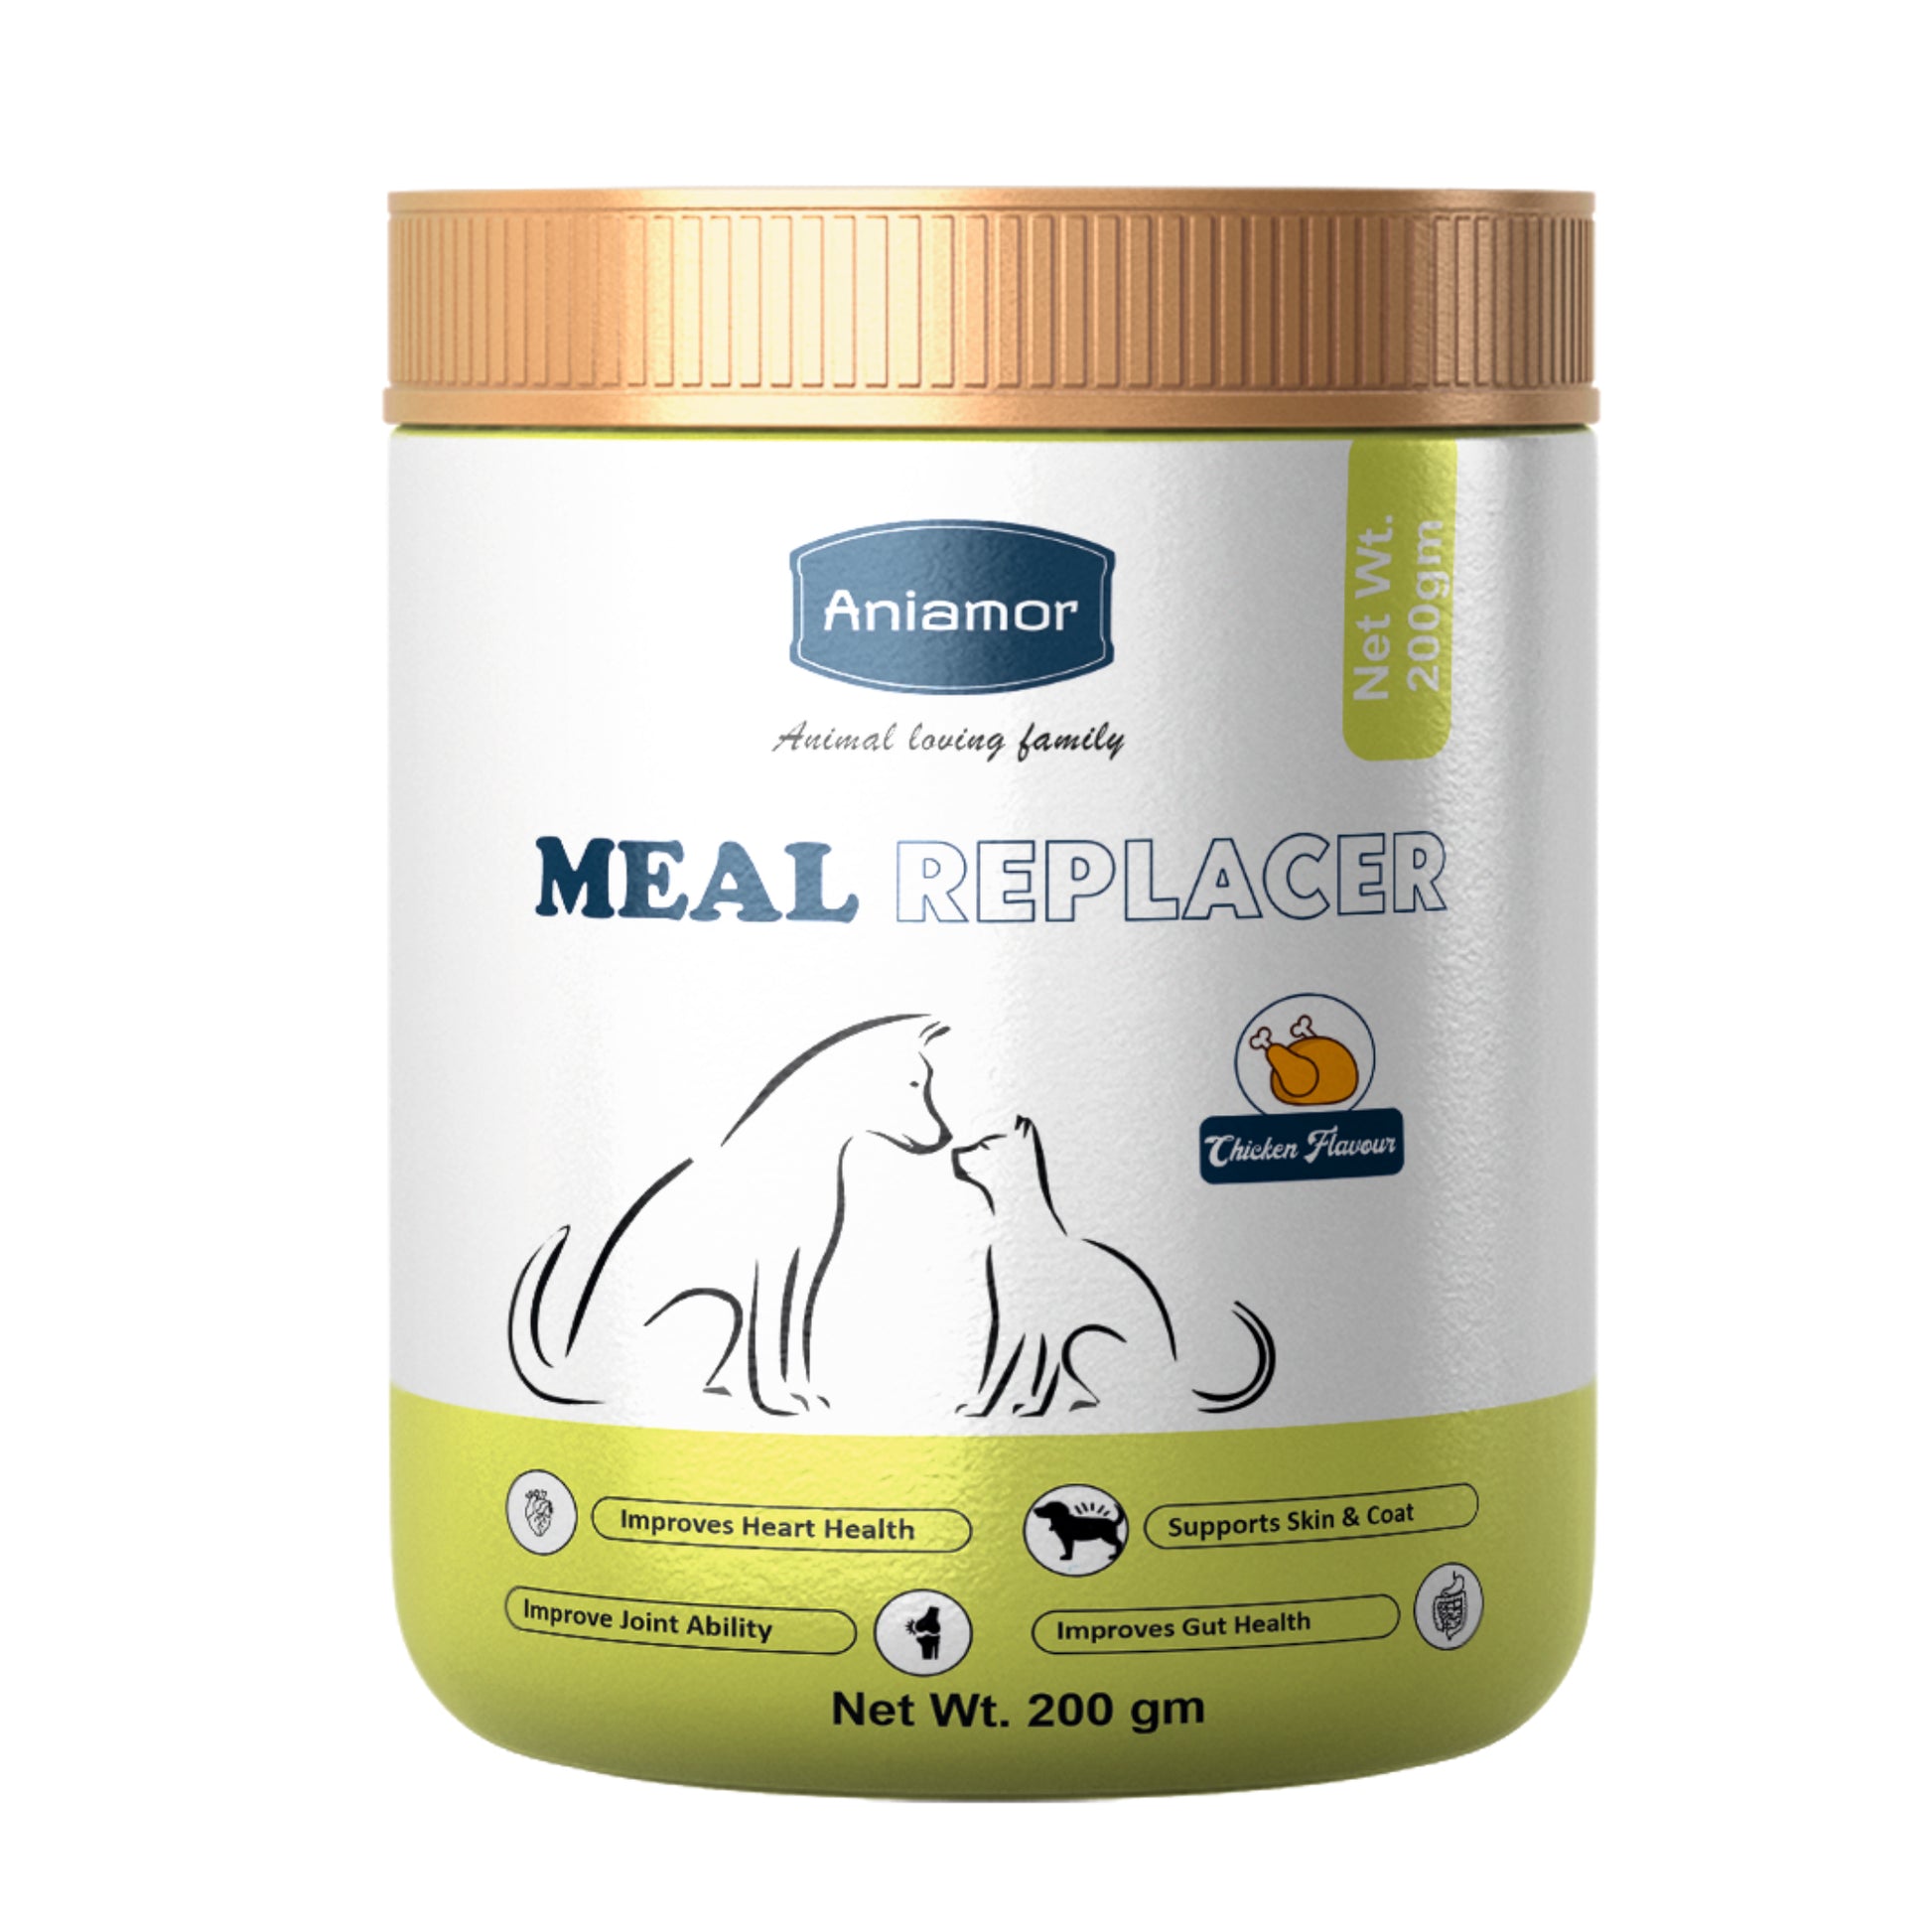 Meal replacer powder-Aniamor| Pet supplement|200gm 